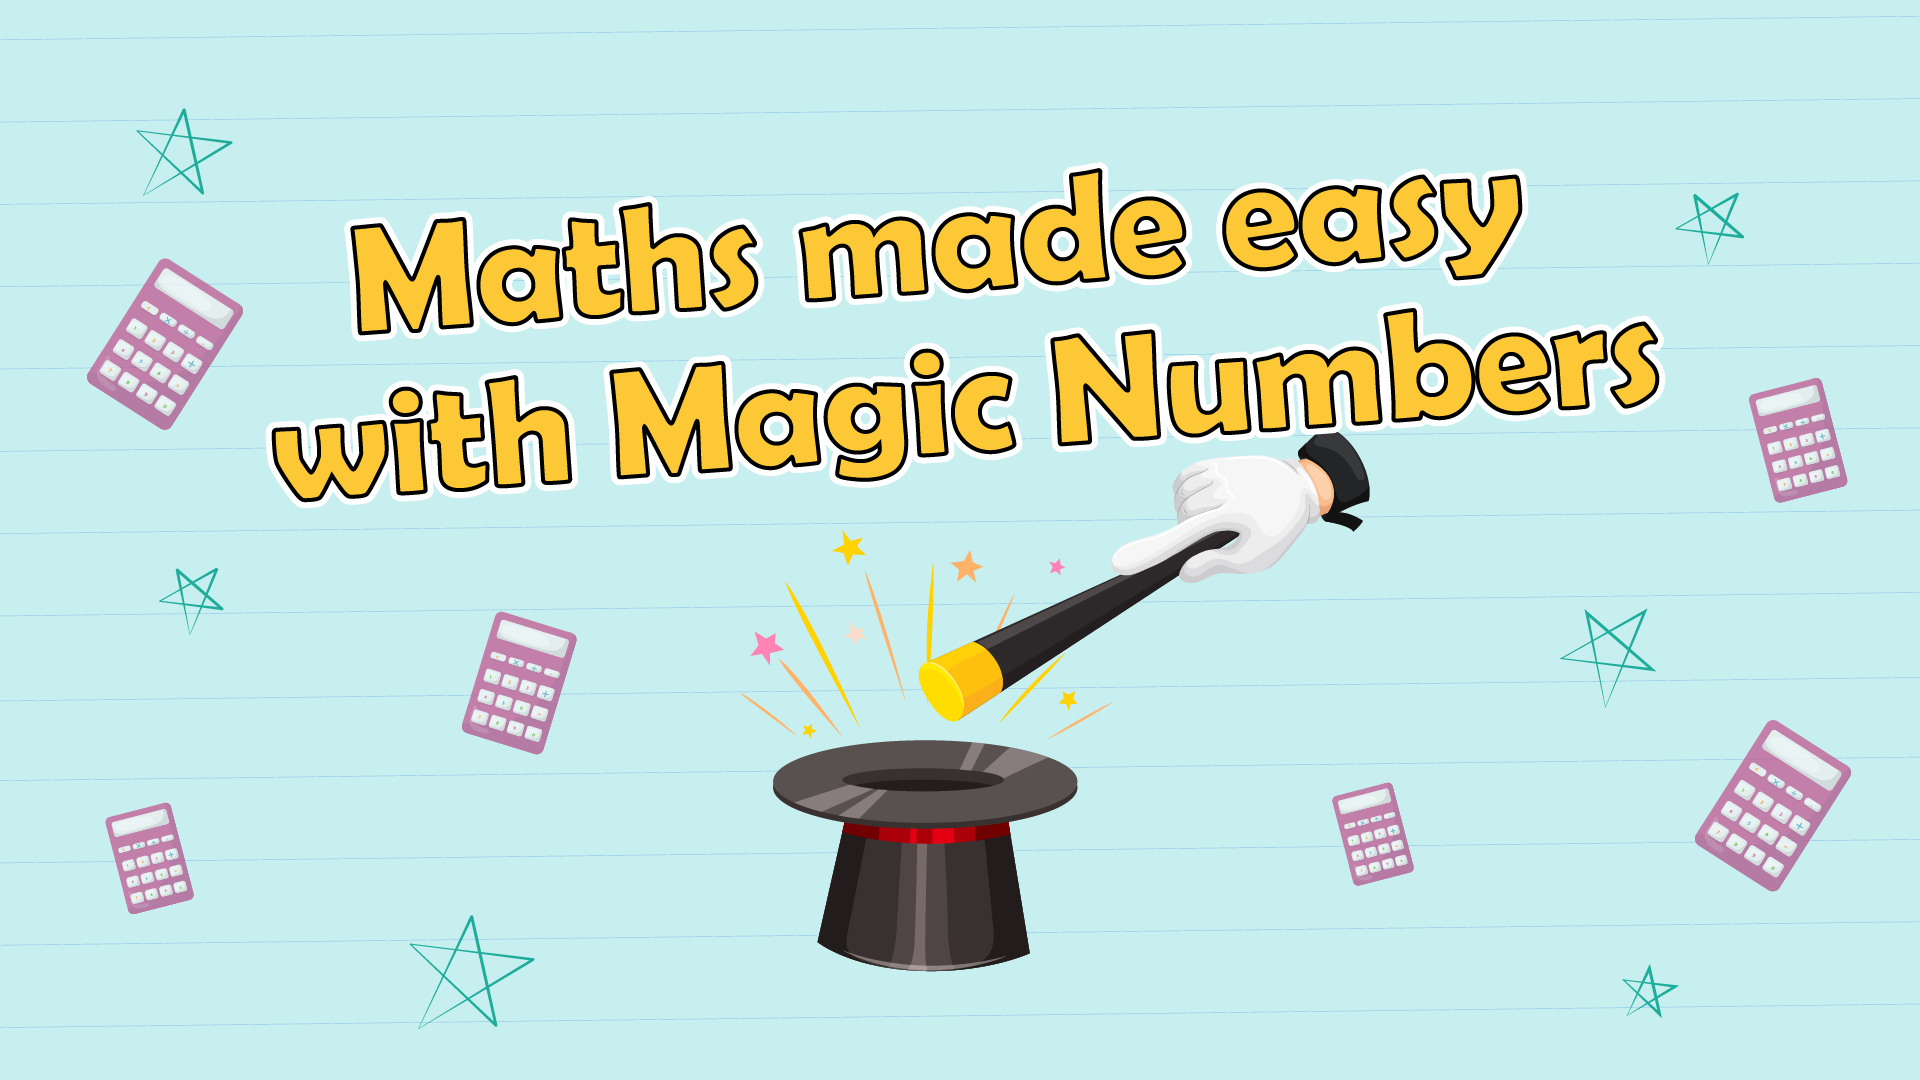 Maths made easy with Magic Numbers